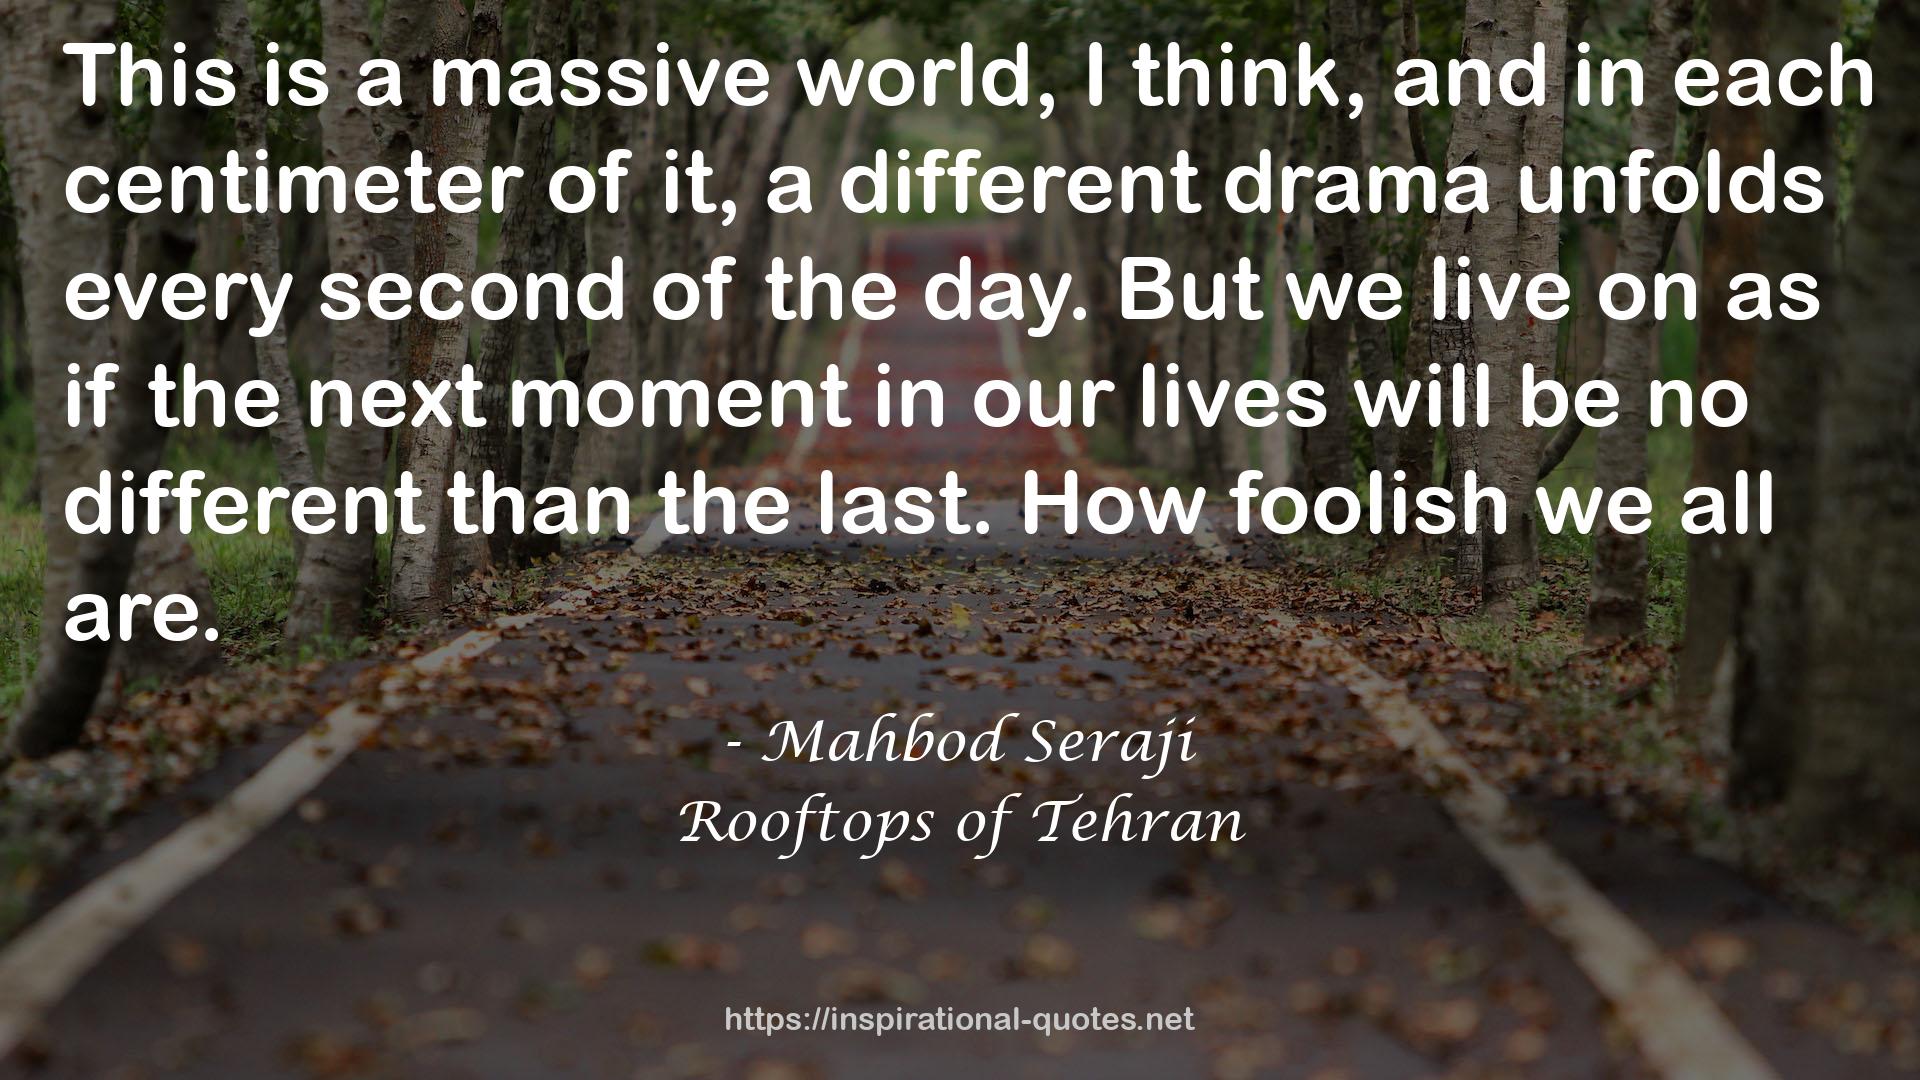 Rooftops of Tehran QUOTES